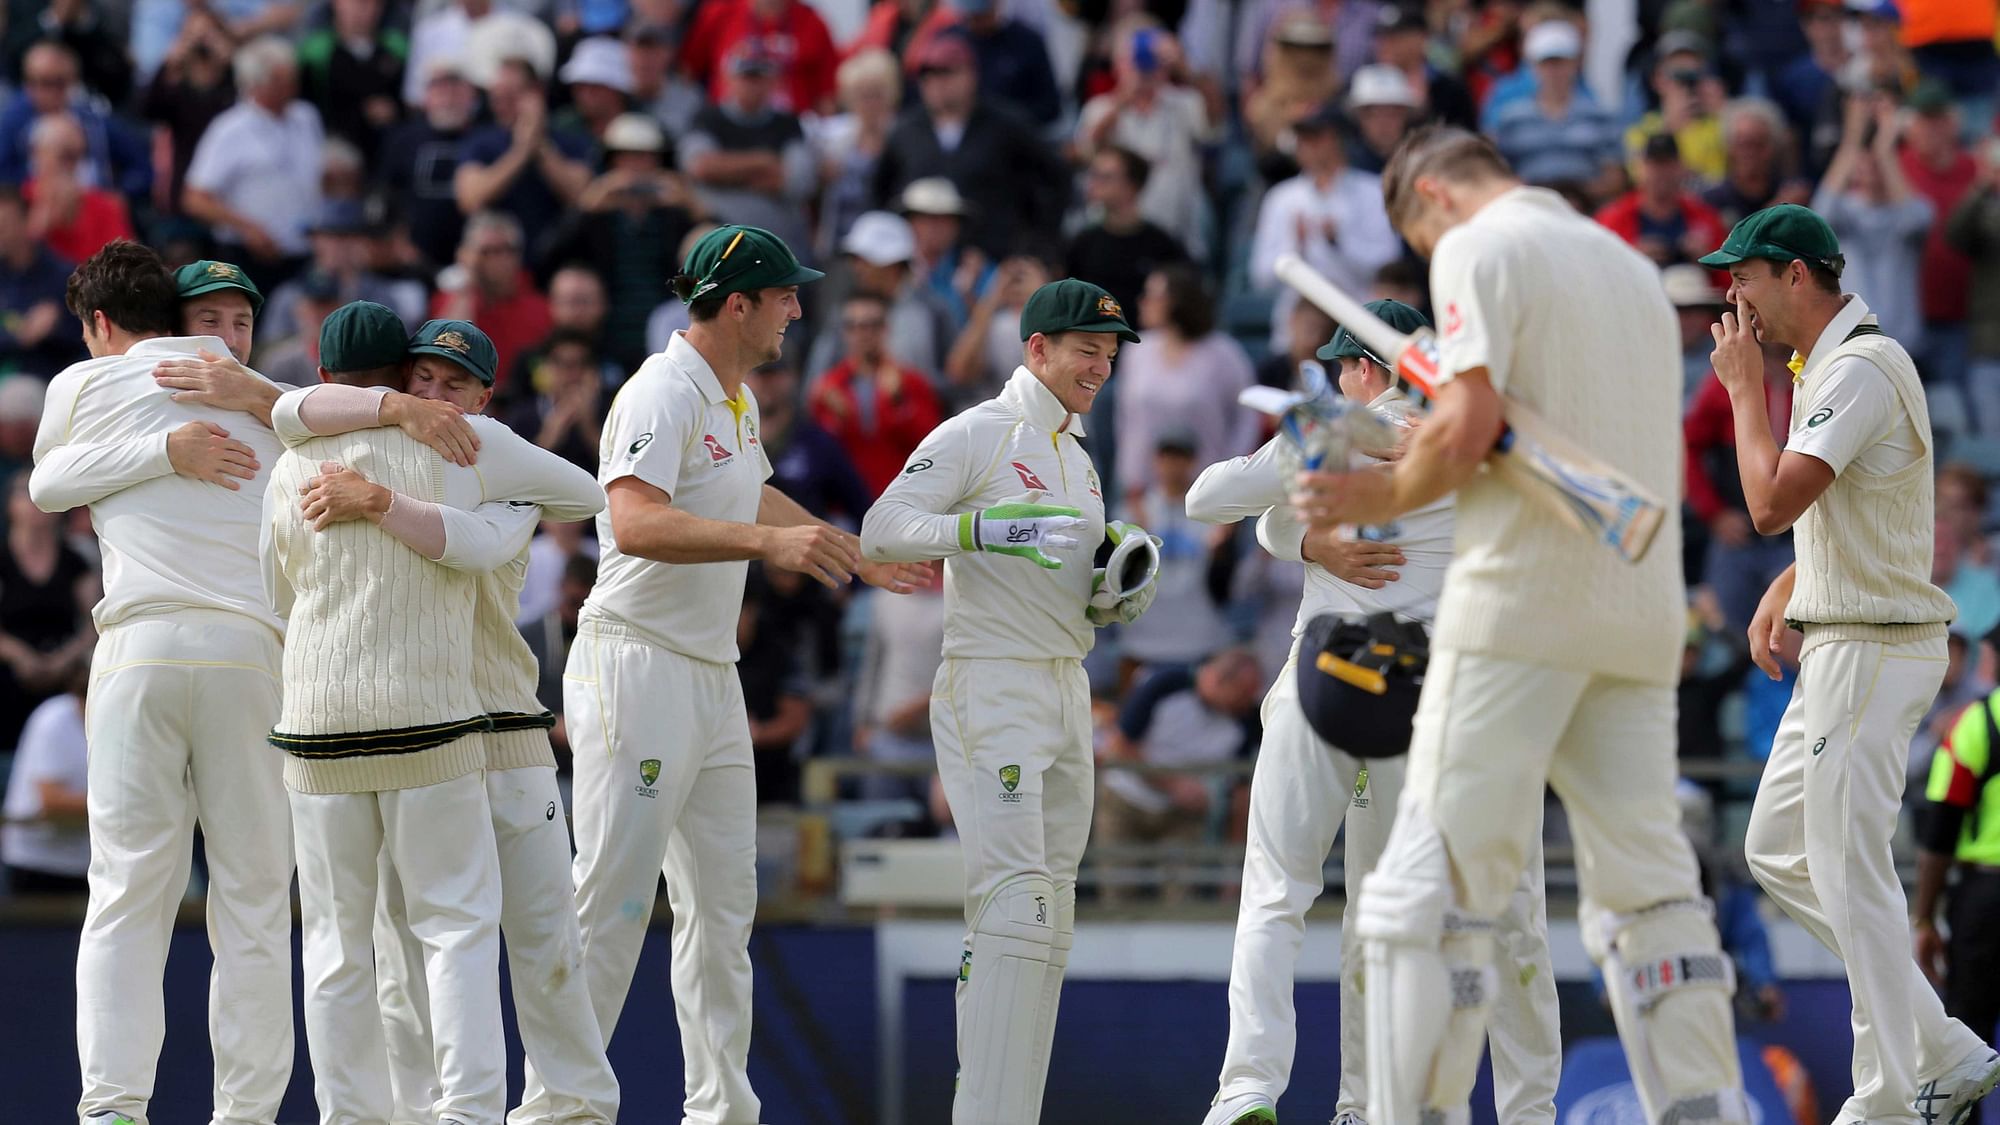 Australian players celebrate winning their Ashes cricket test match as England’s James Anderson, second right, lowers his head in Perth